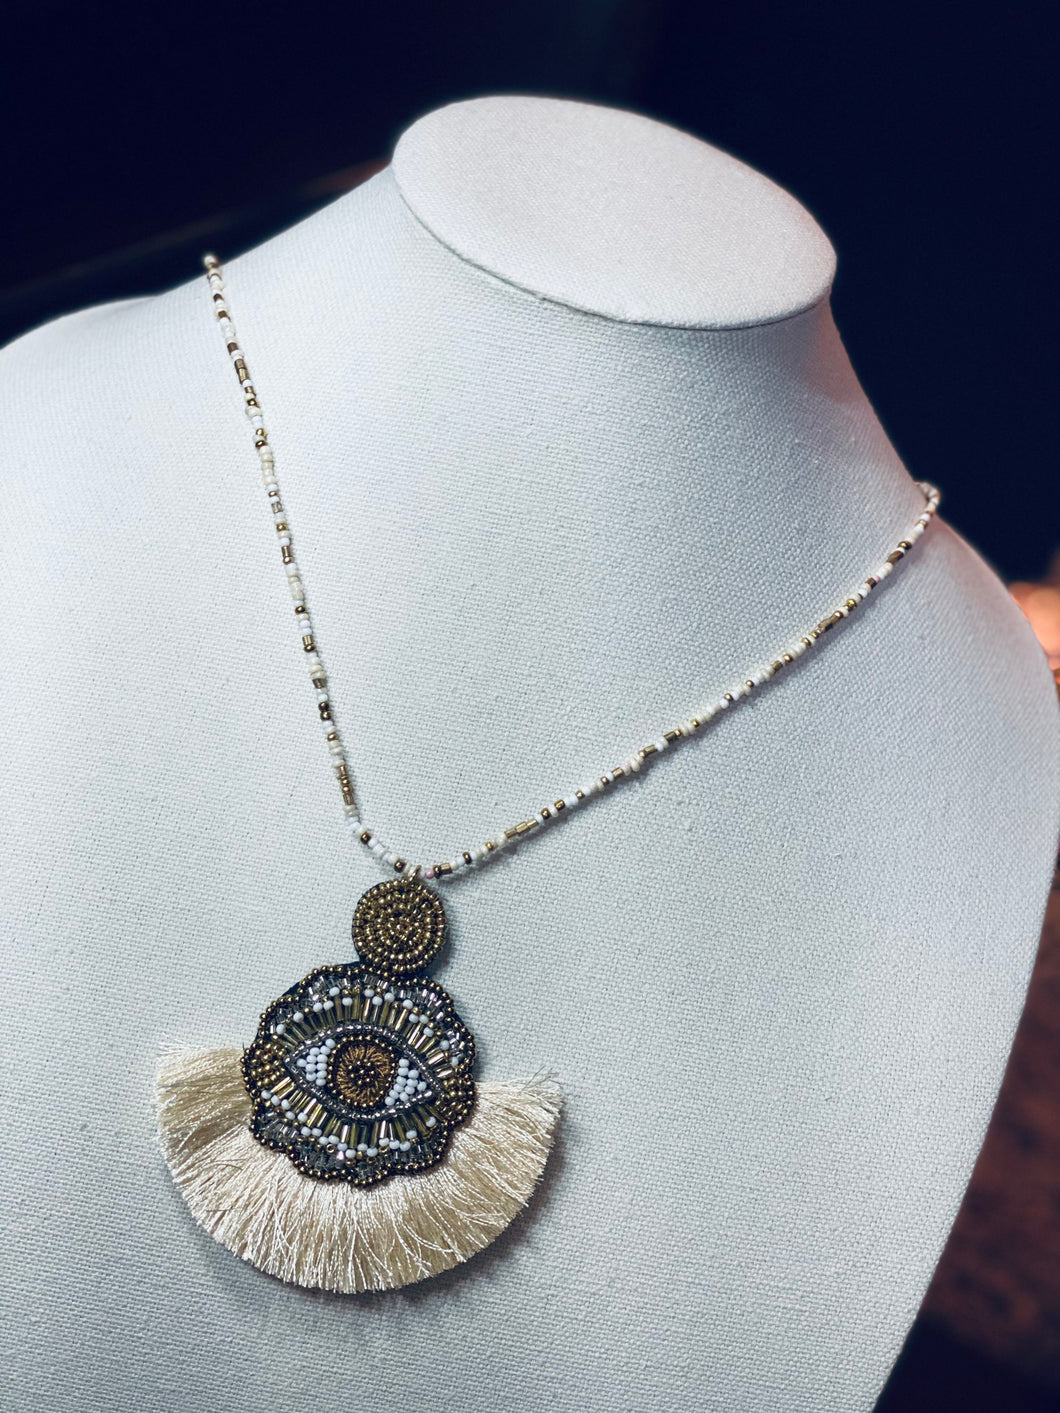 Evil Eye Tassel Necklace with Beads